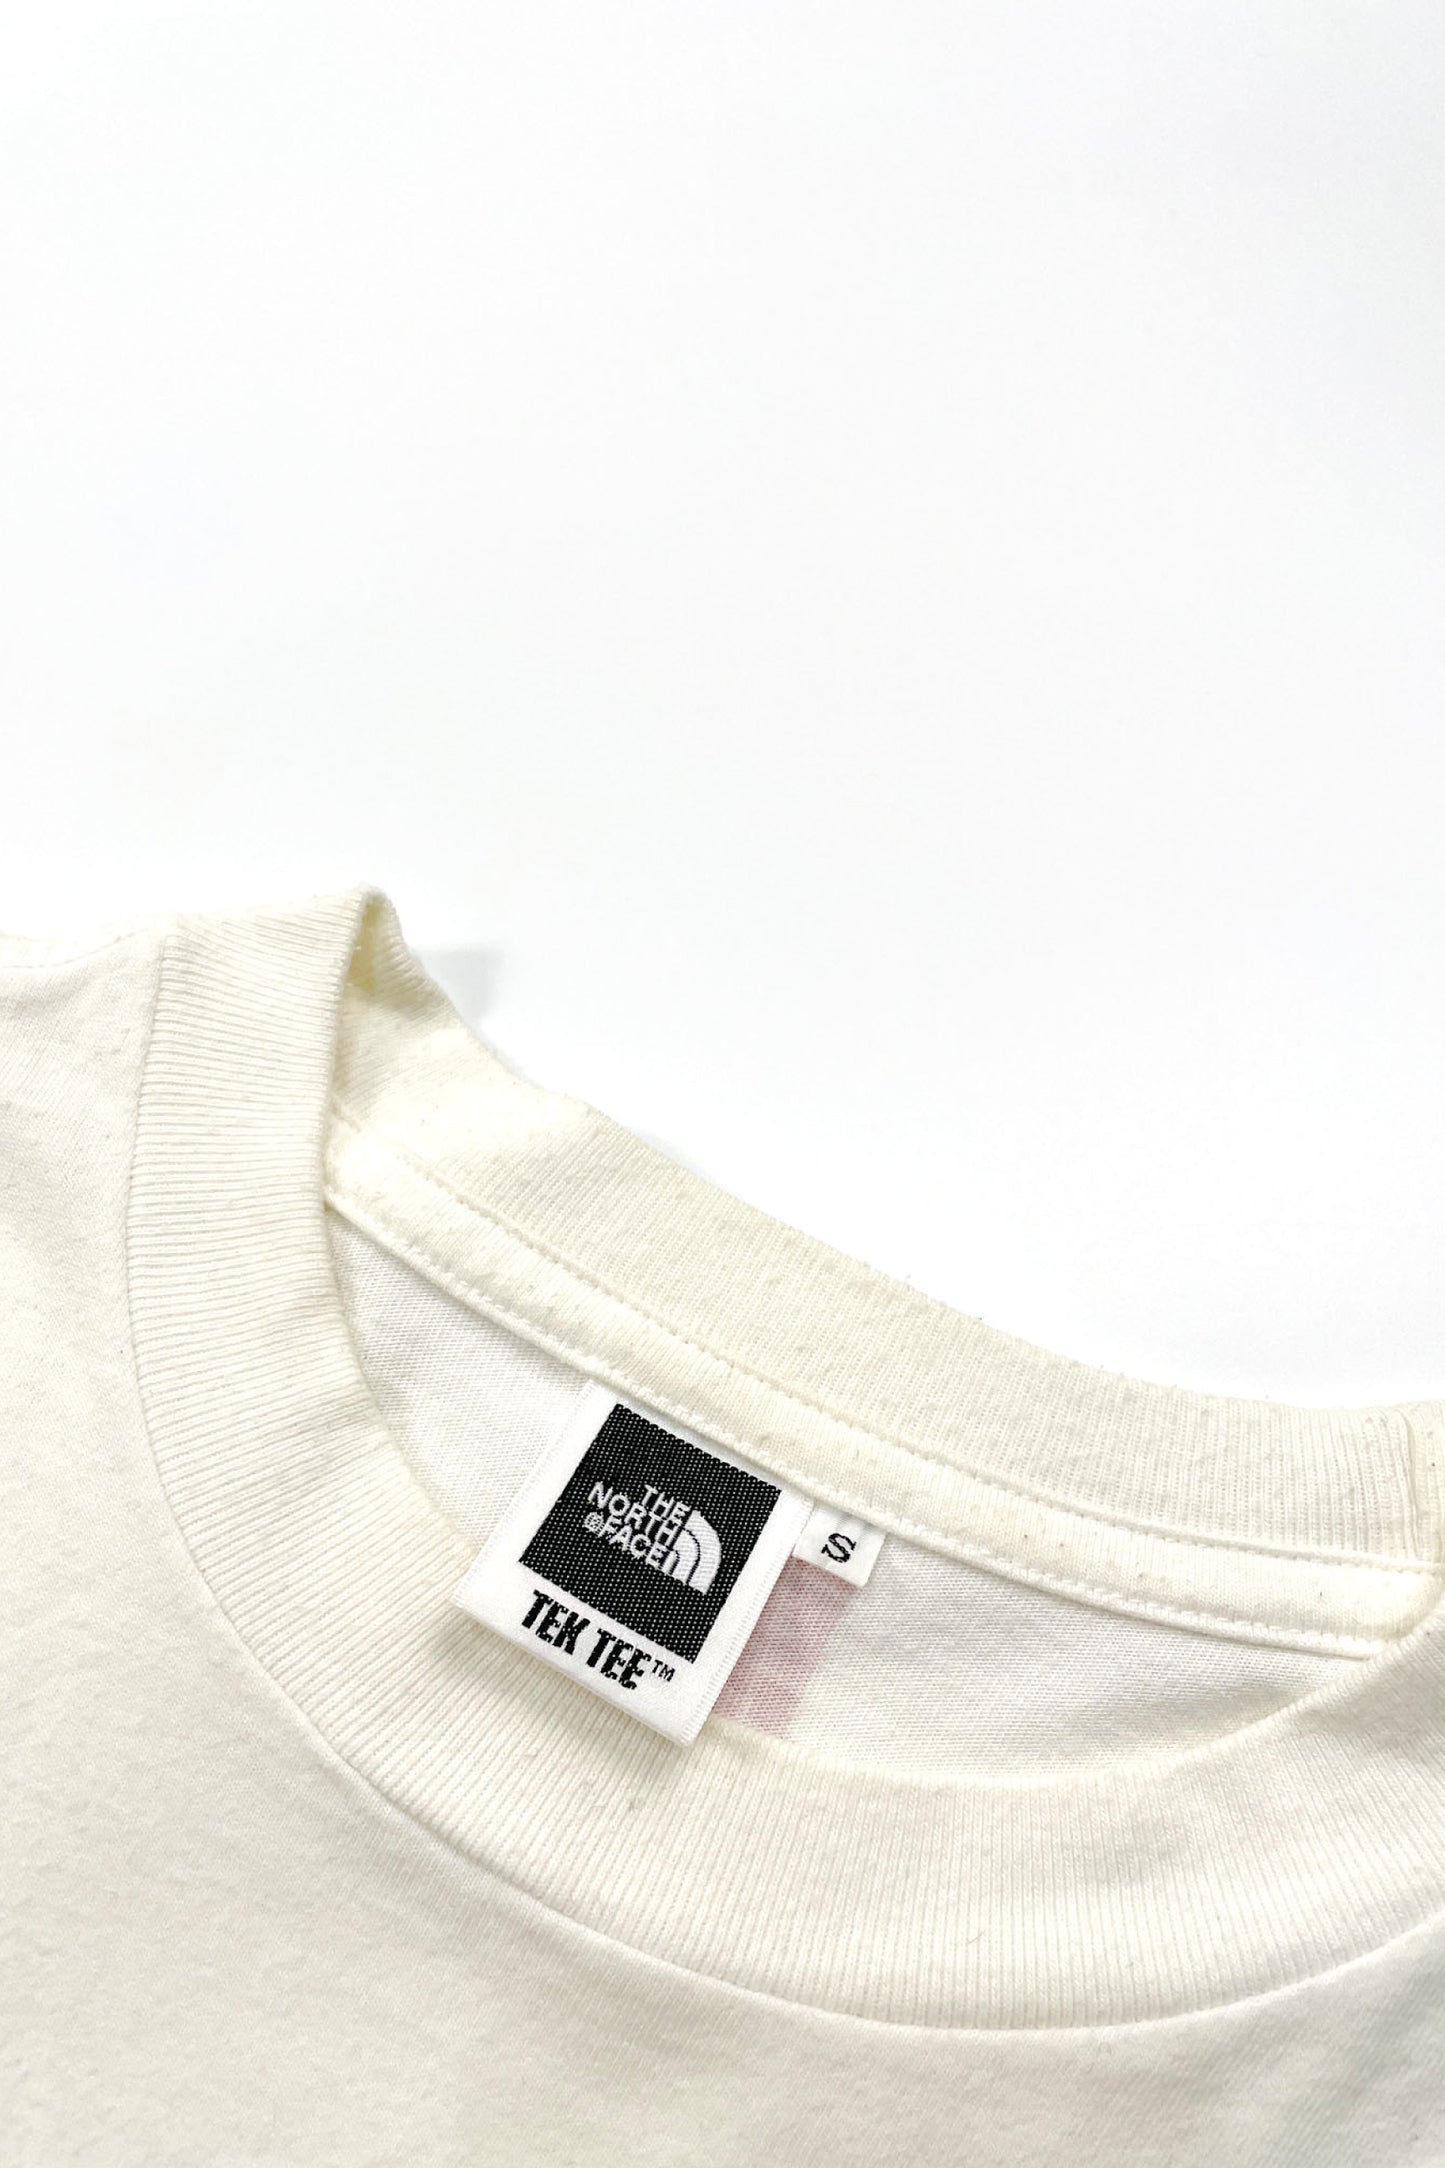 90's THE NORTH FACE T-shirt